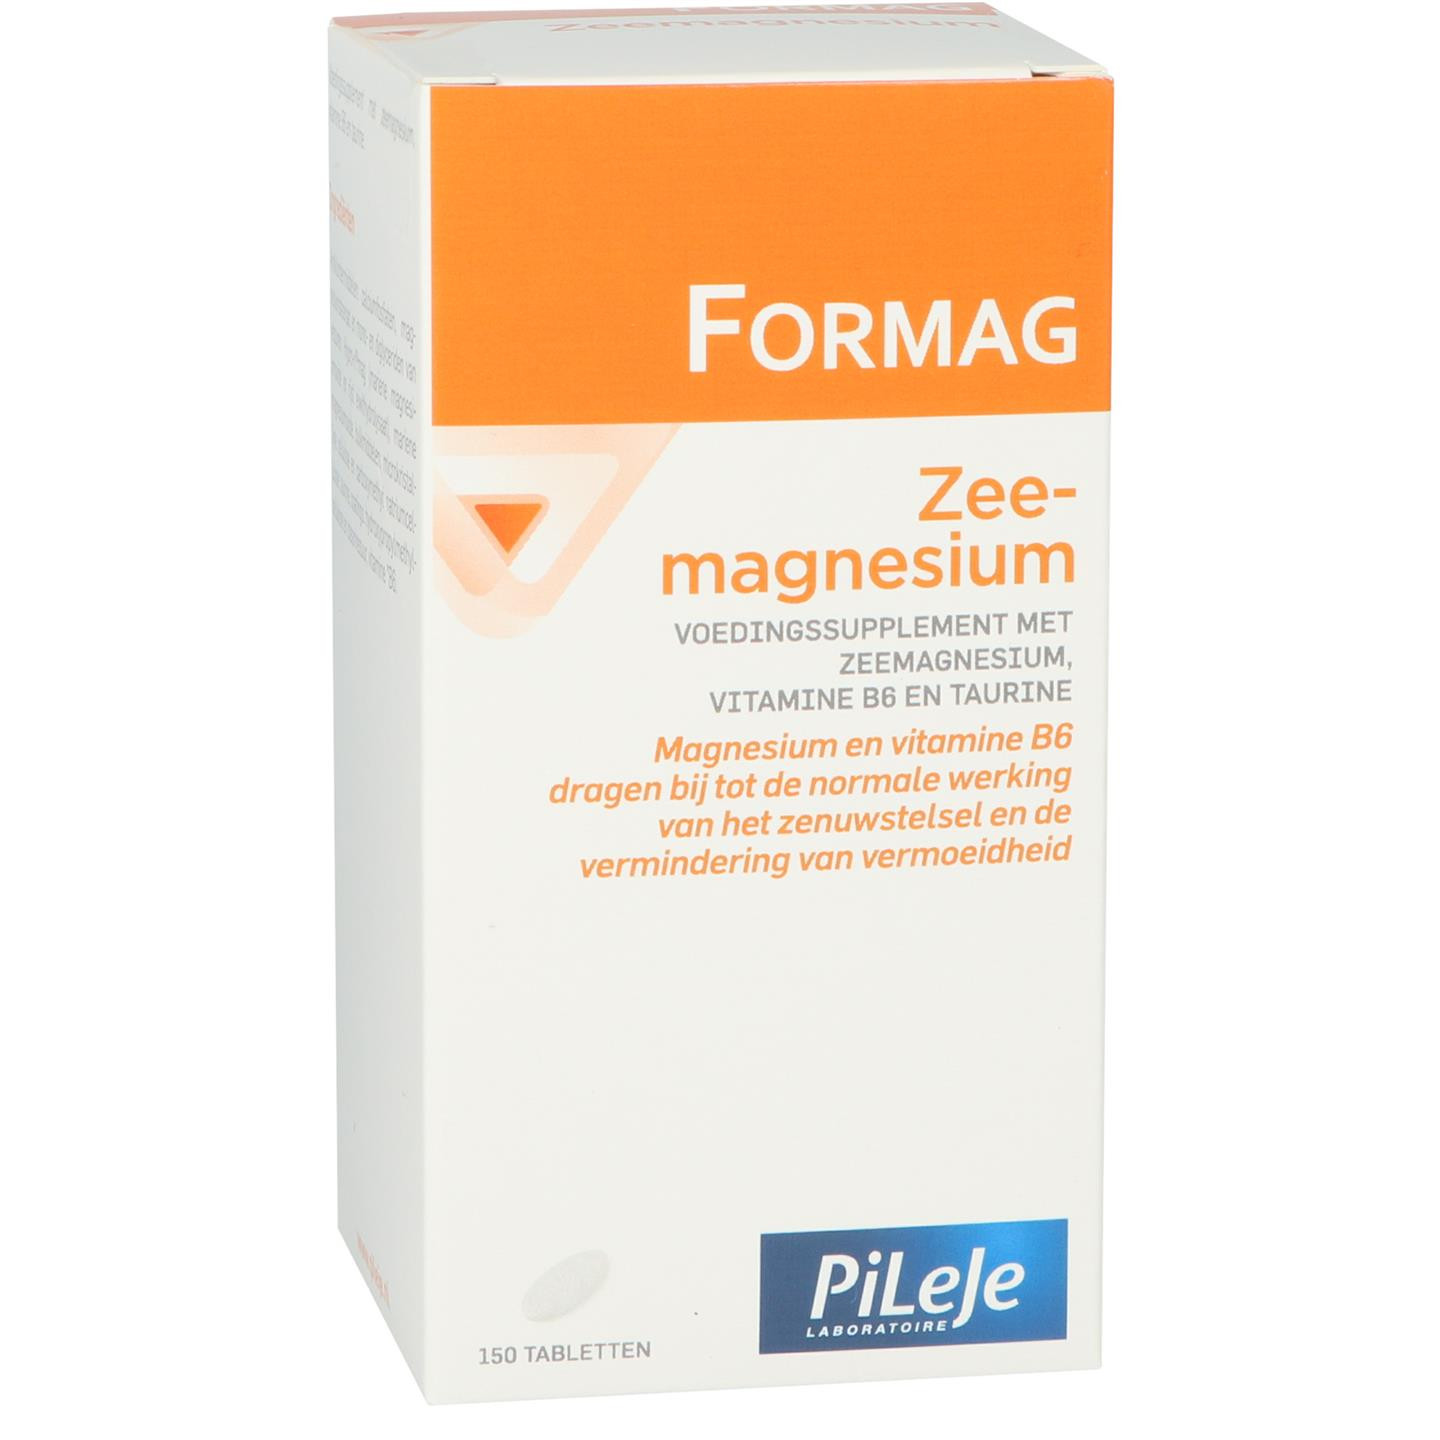 ForMag